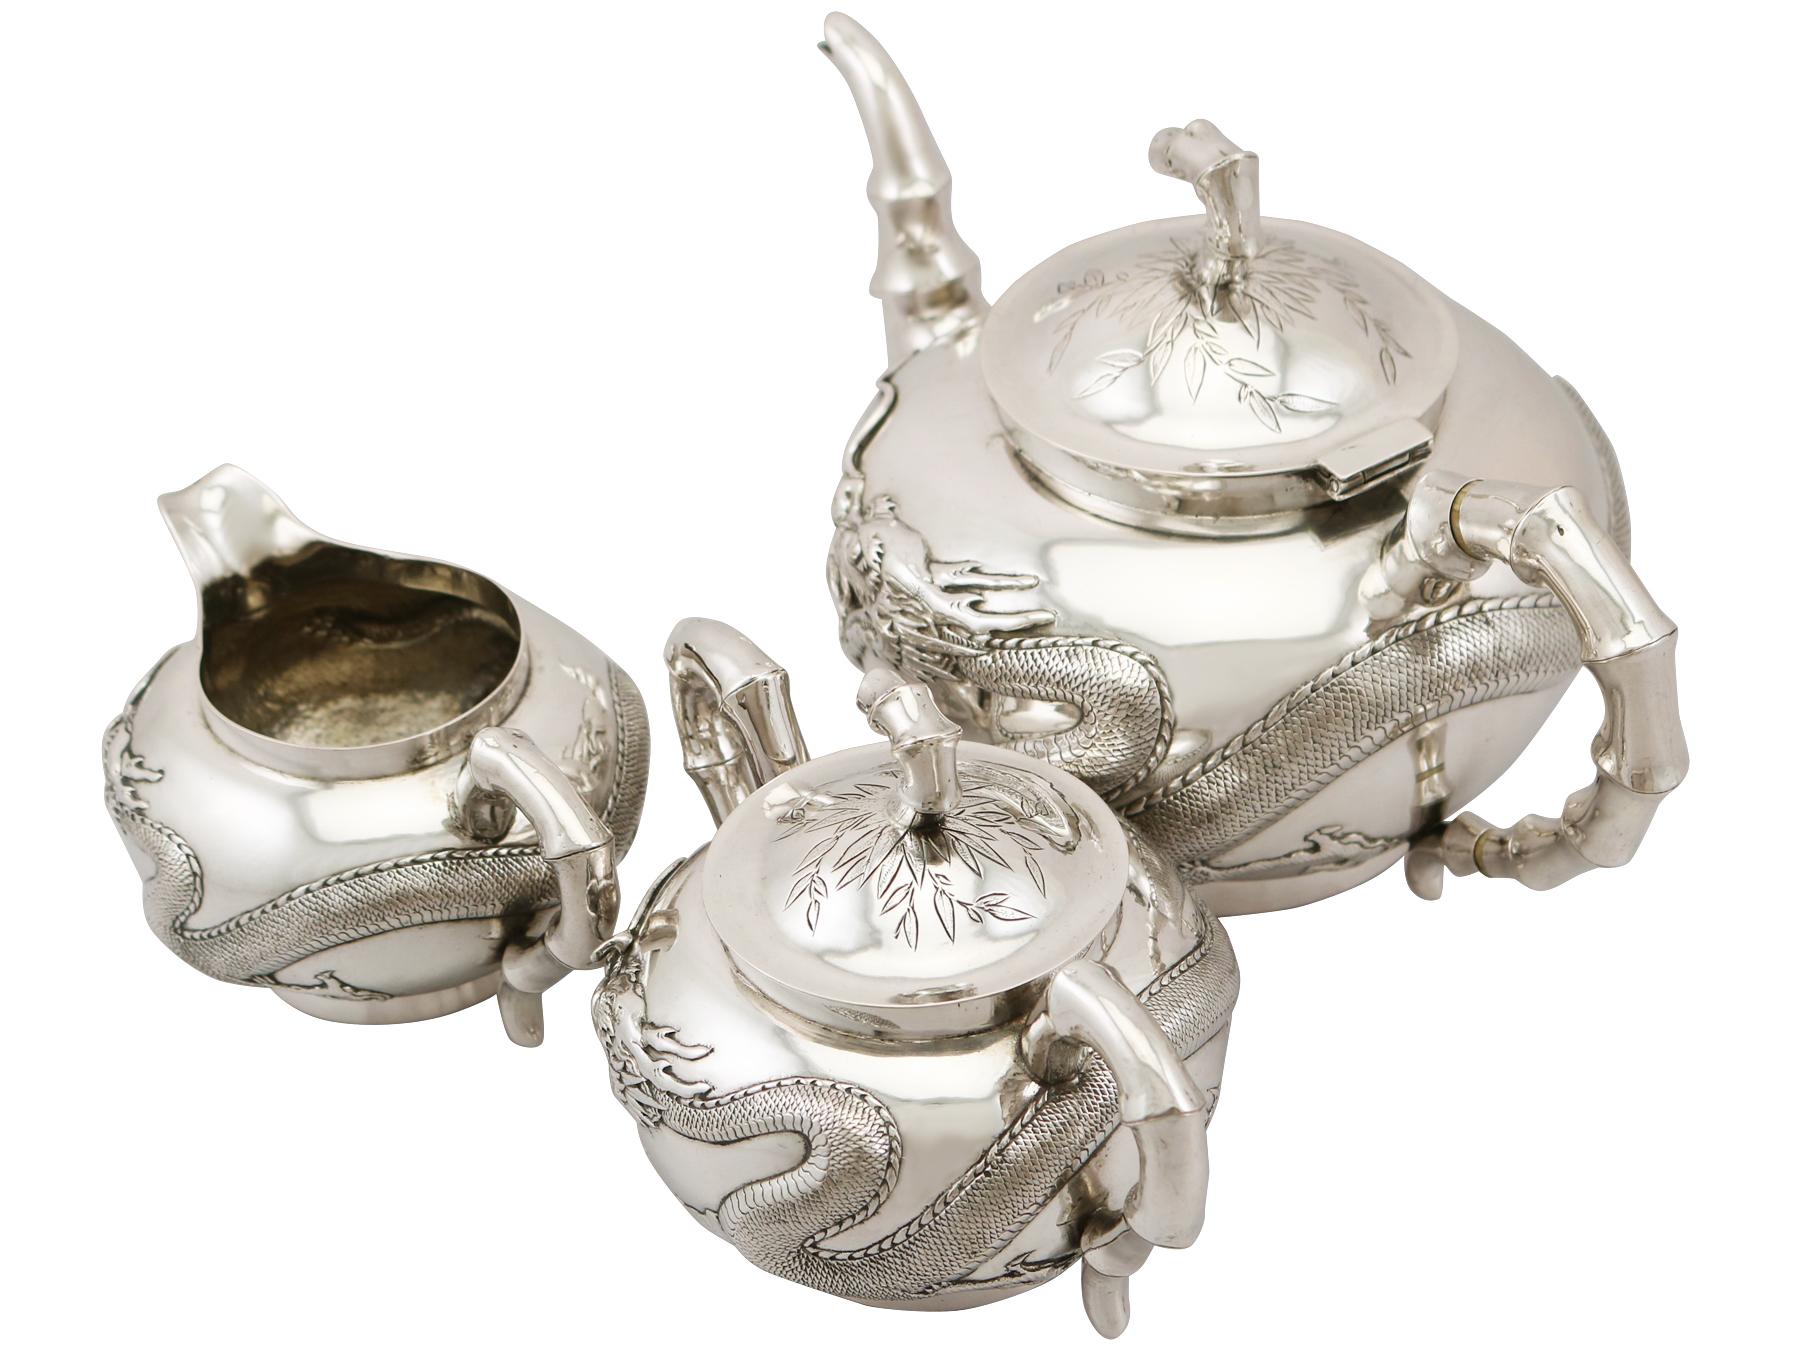 An exceptional, fine and impressive antique Chinese export silver three piece tea service; an addition to our diverse silver teaware collection.

This exceptional antique Chinese silver tea set/service consists of a teapot, cream jug and sugar